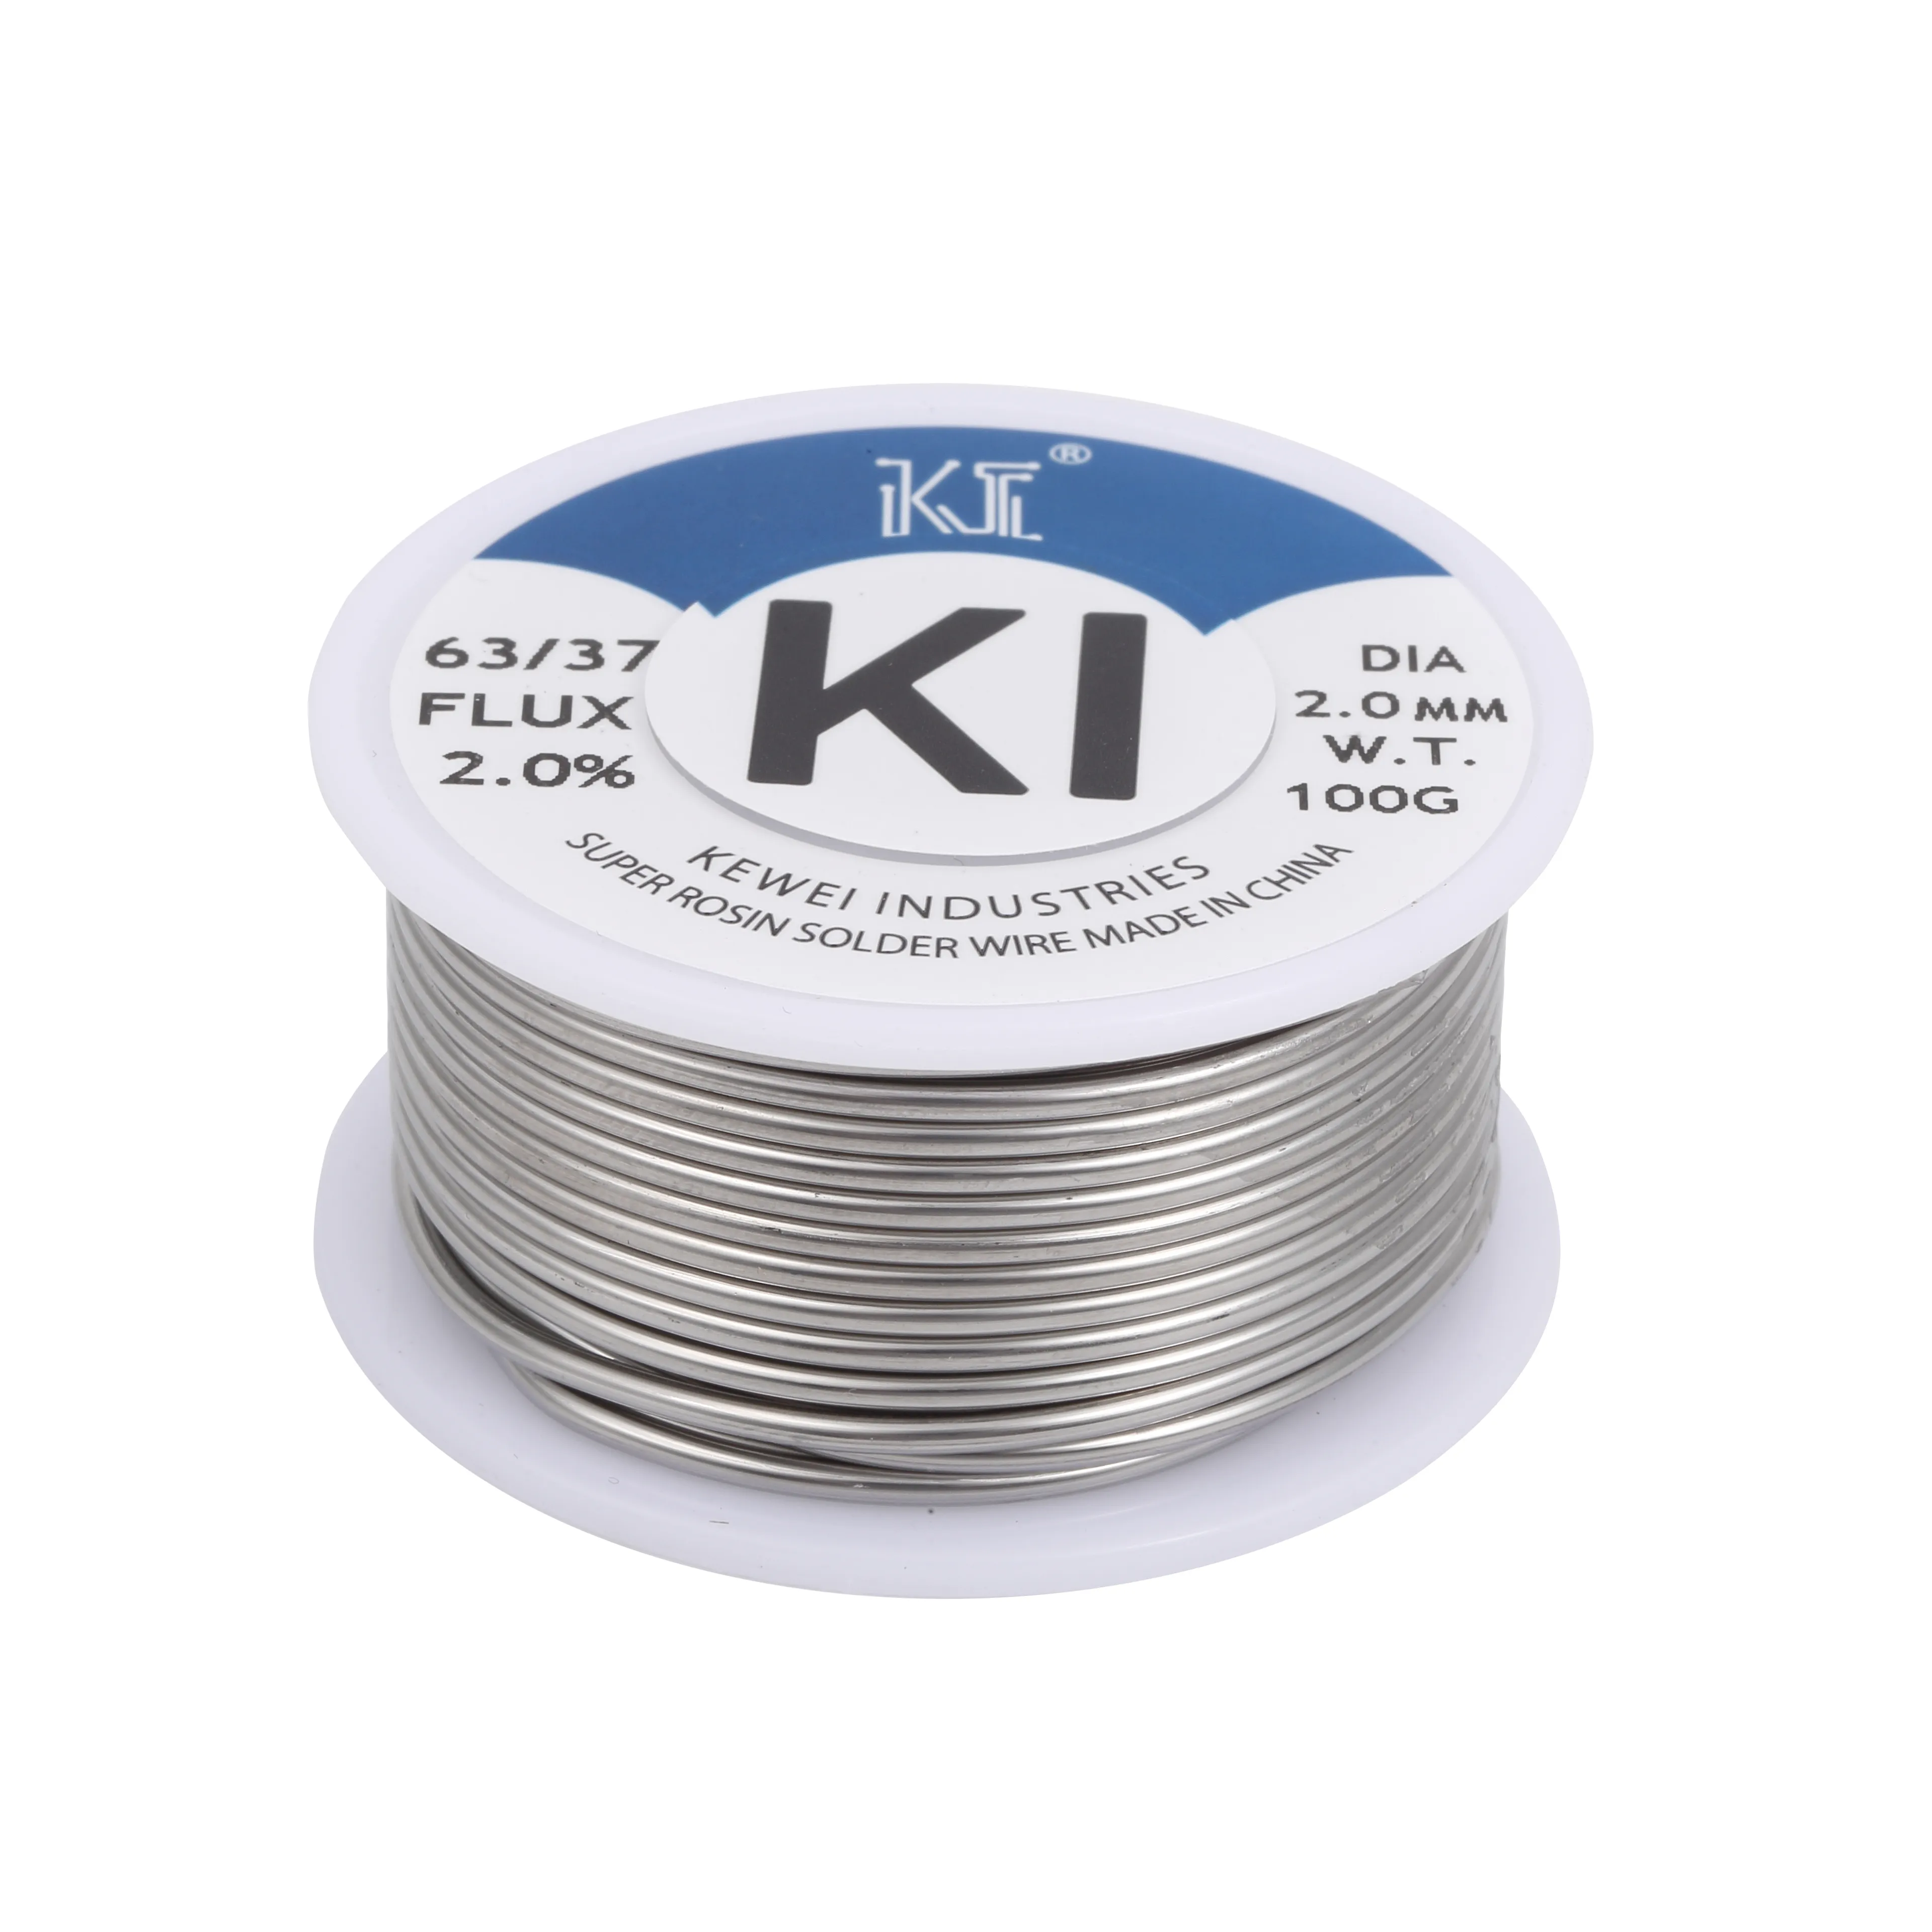 Kewei Solder 1.0mm 40/60 Sn40%Pb60% Solder Wire High Quality Raw Material